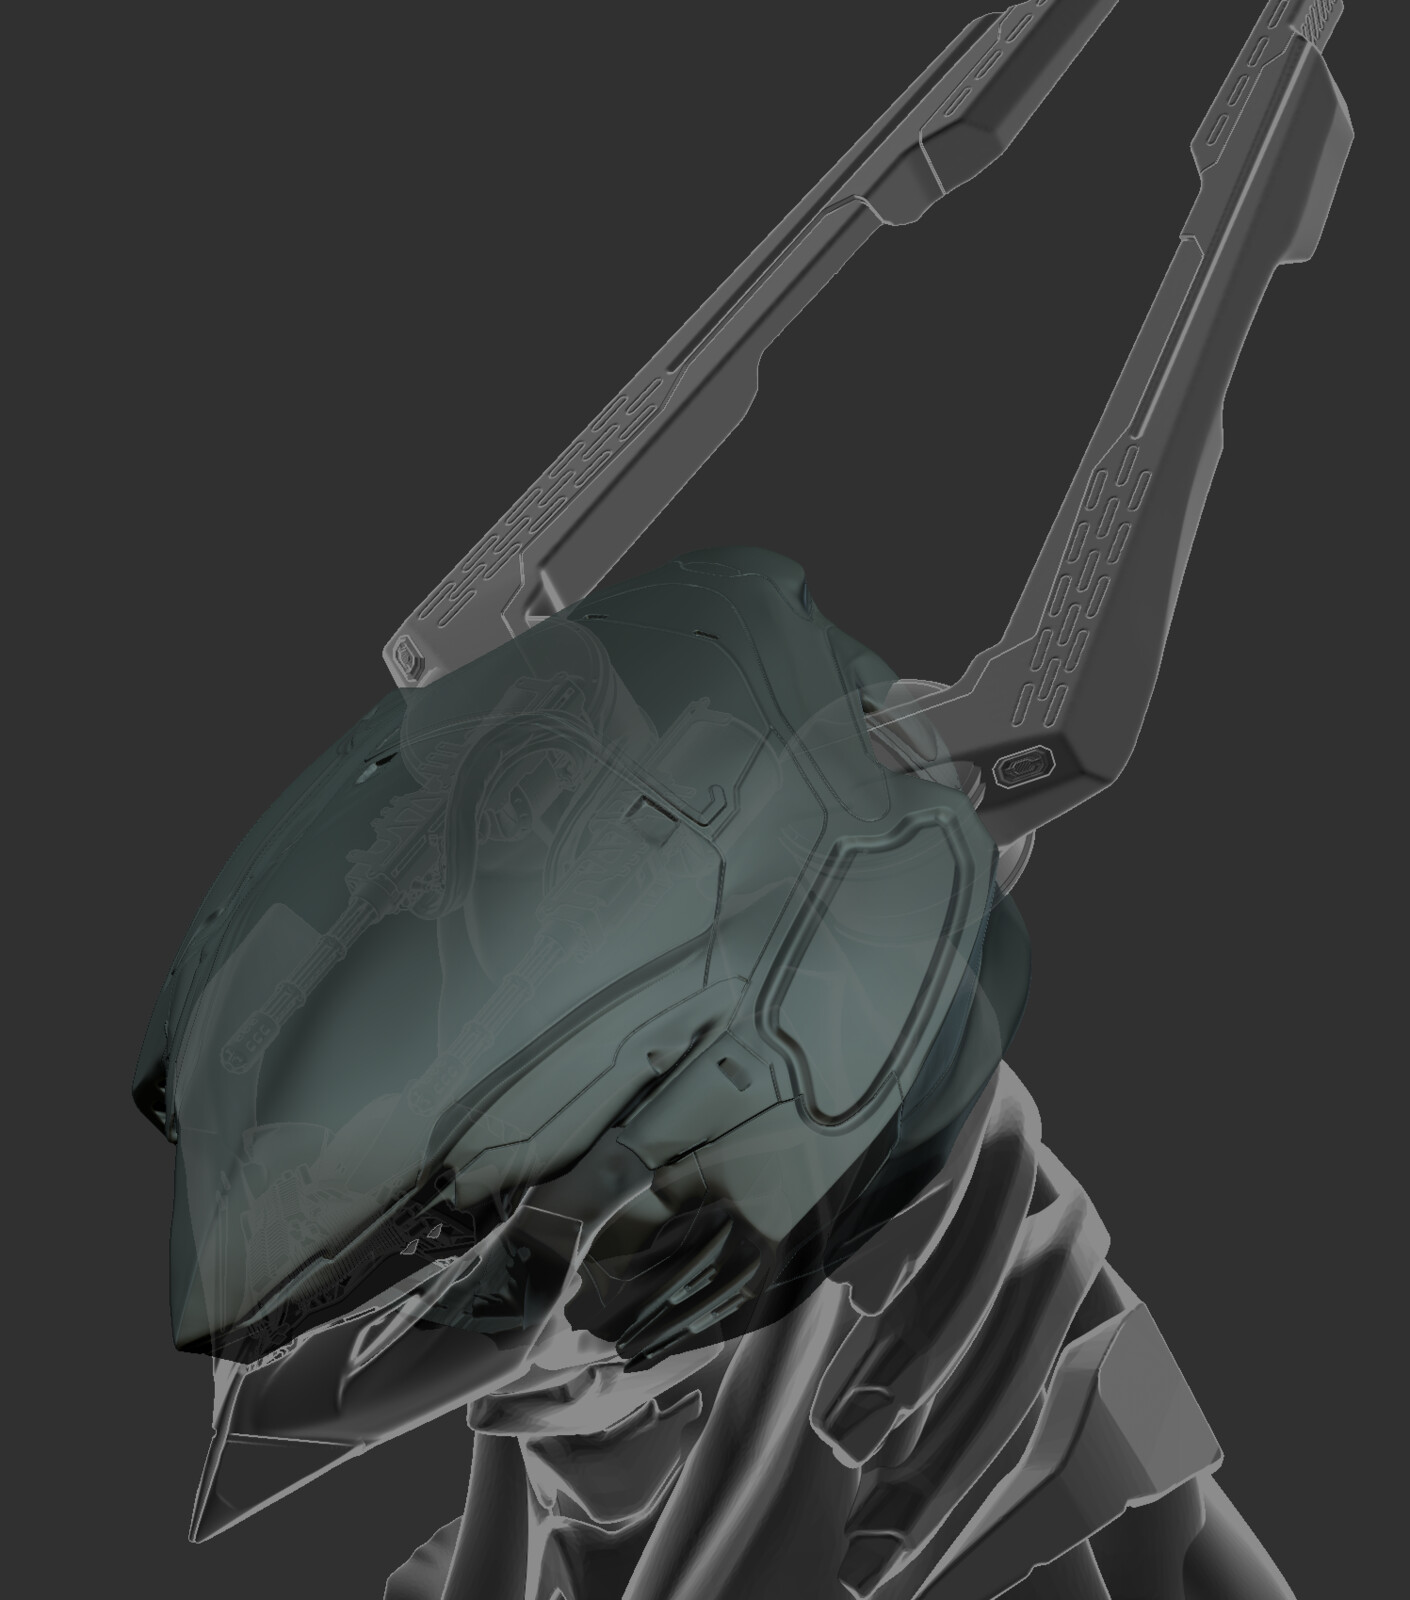 Rotor cannon placement in head.